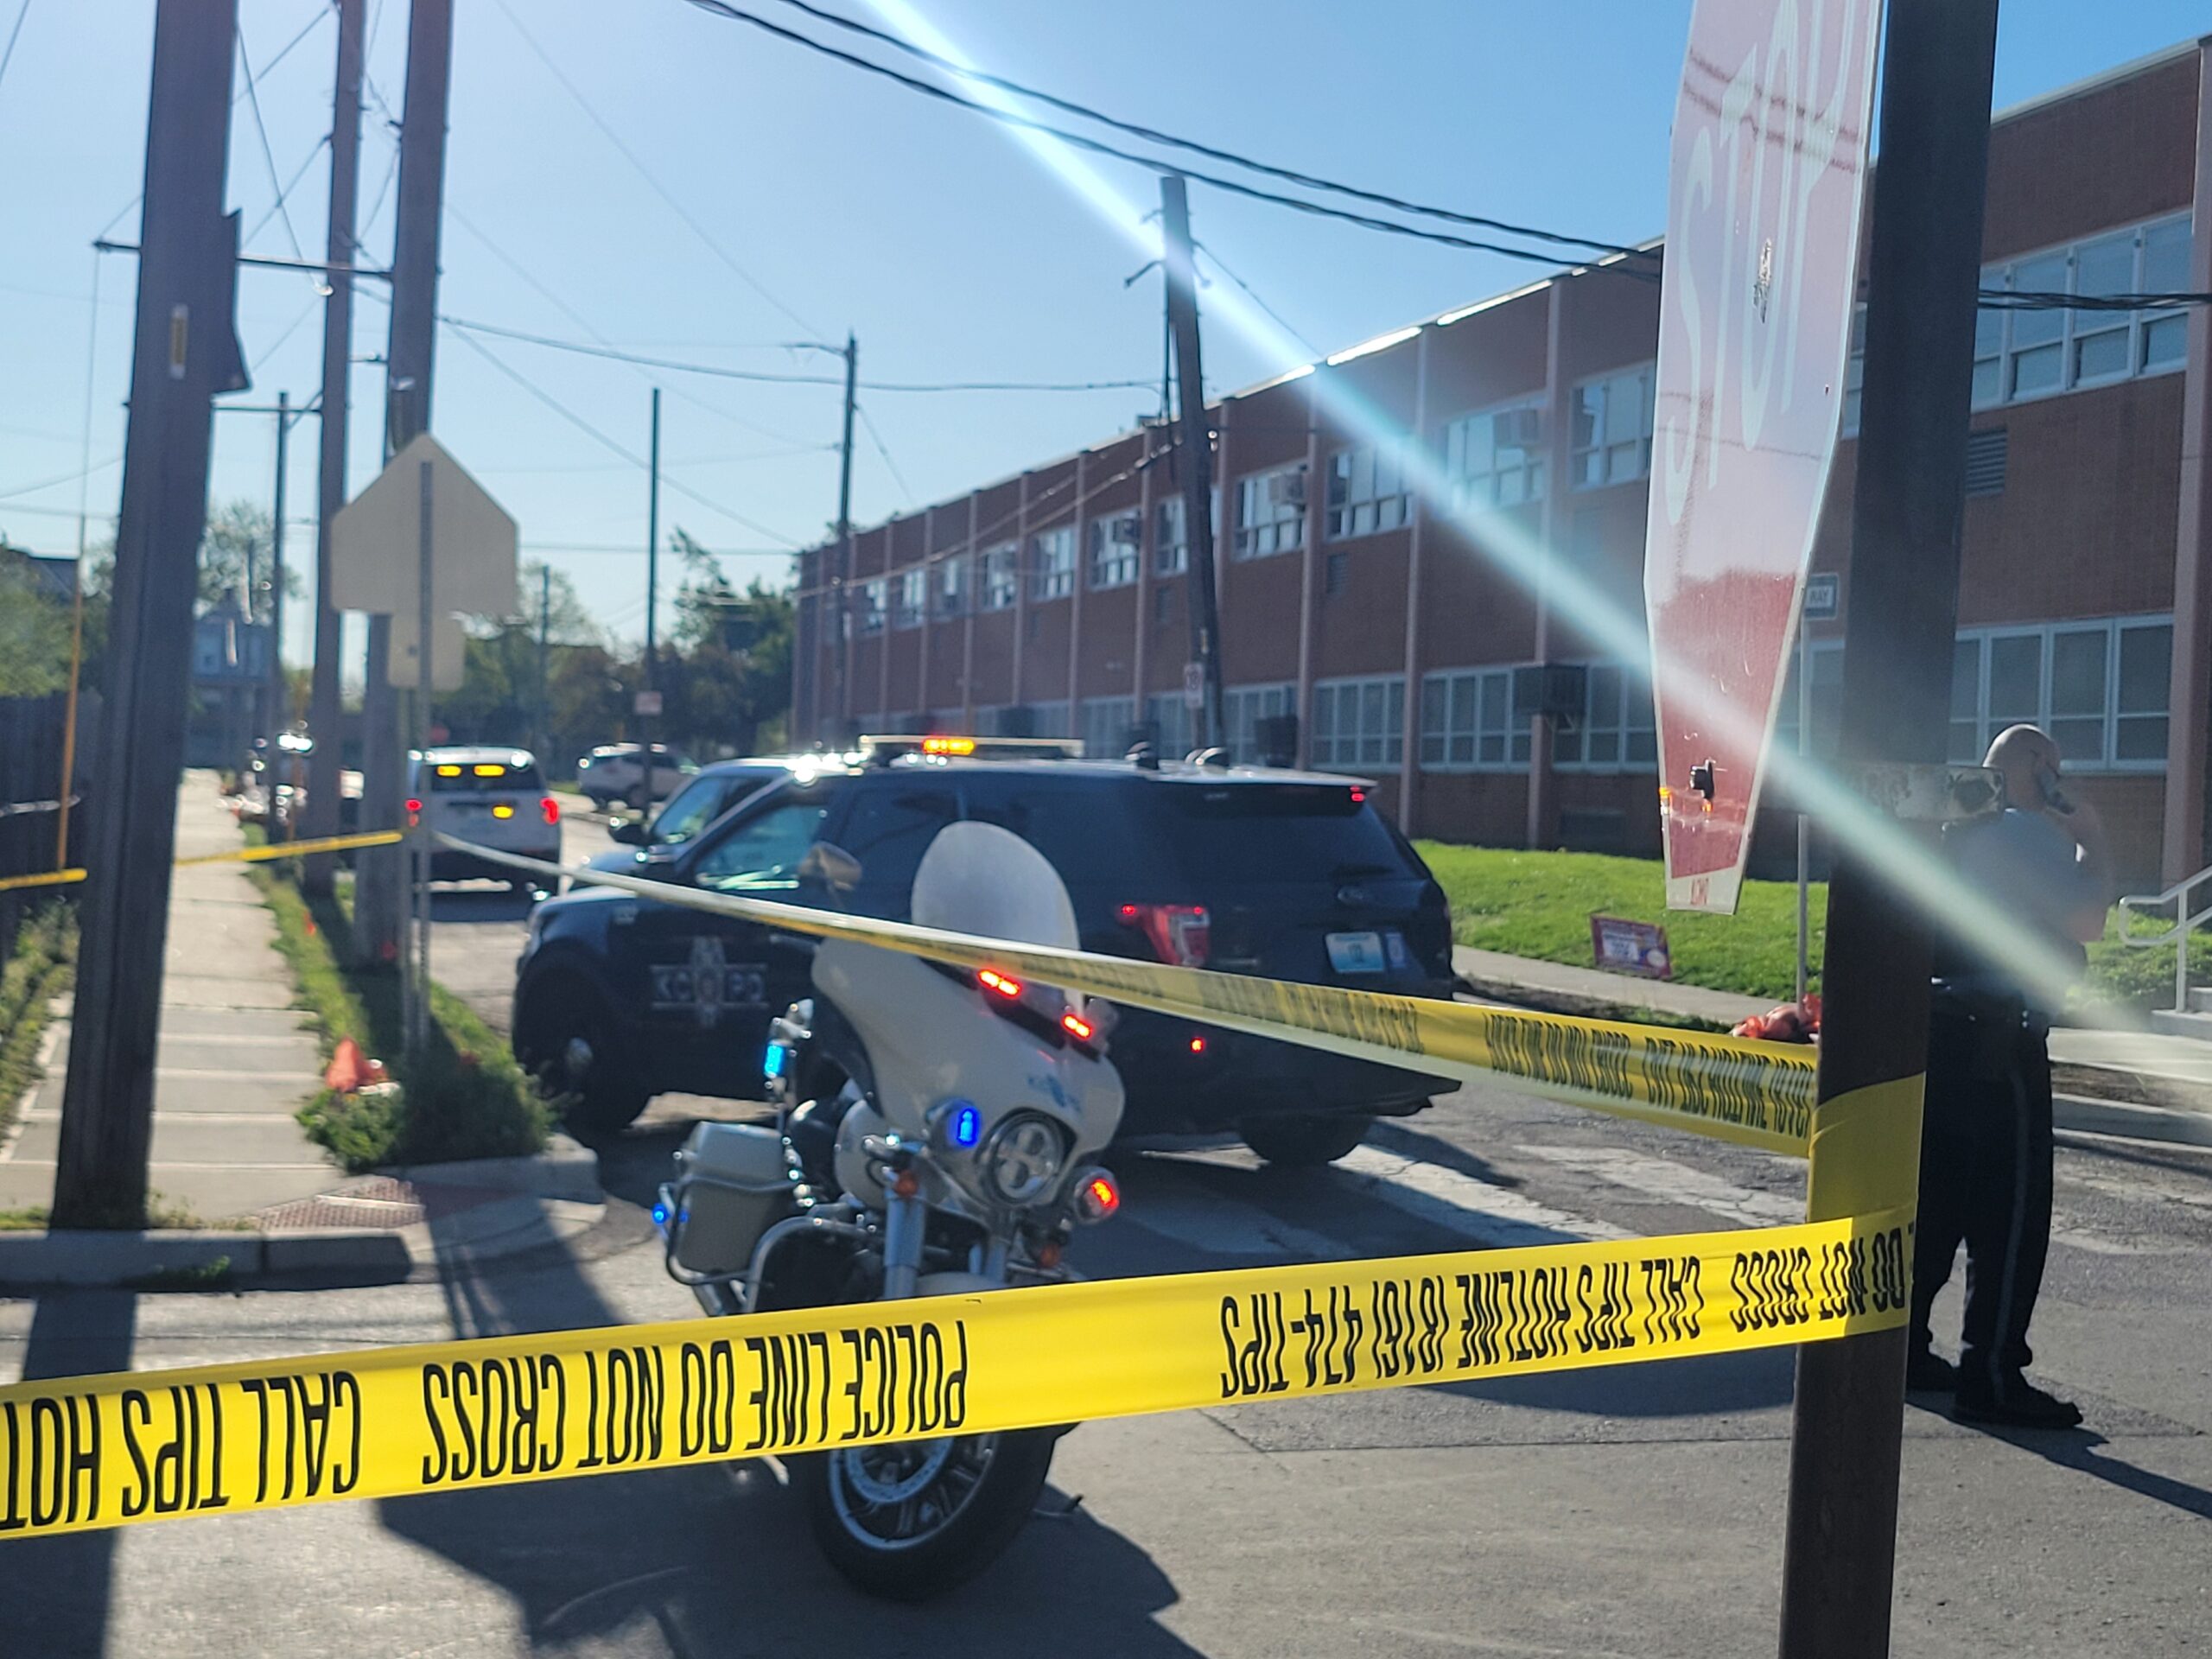 Double shooting sends two to hospital